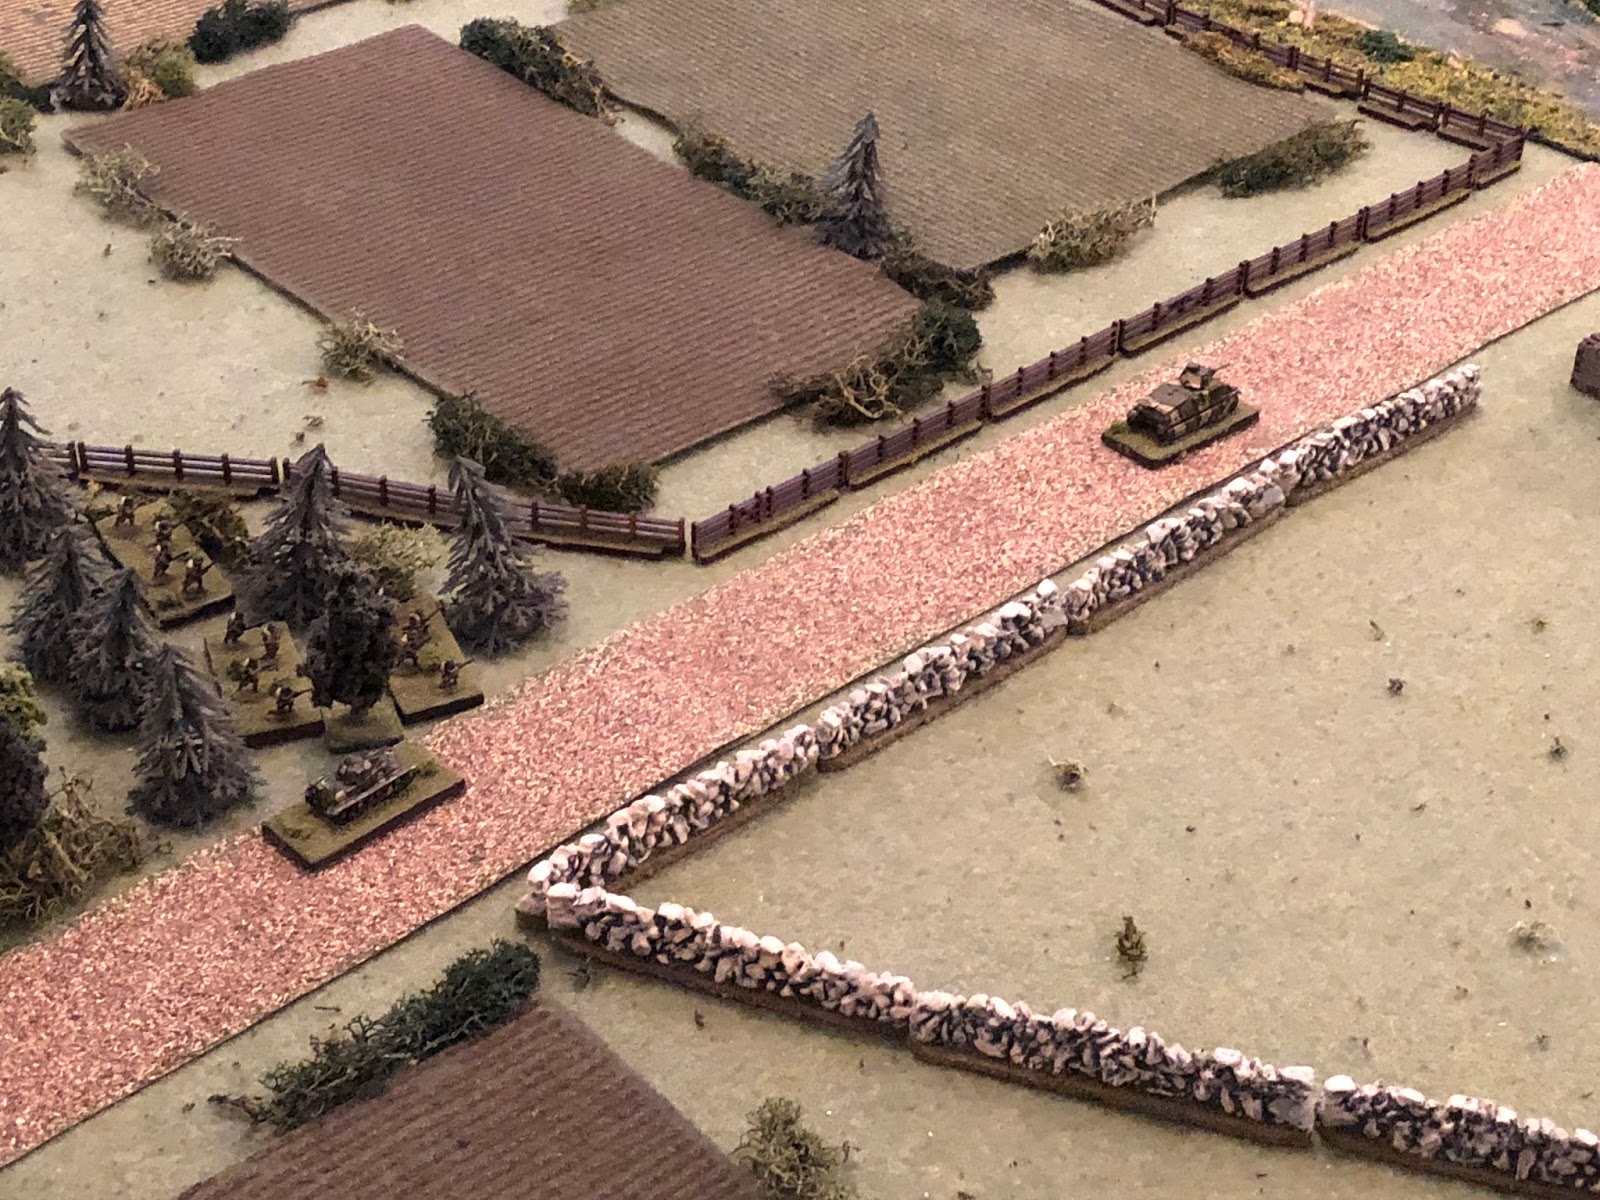  In the center, the H39 (bottom left) provides overwatch as the remaining Somua dashes east down main street (top right).&nbsp; The French 2nd Platoon, still sheltering in wood at the intersection (far left), look on&nbsp; as the tank skids to a halt